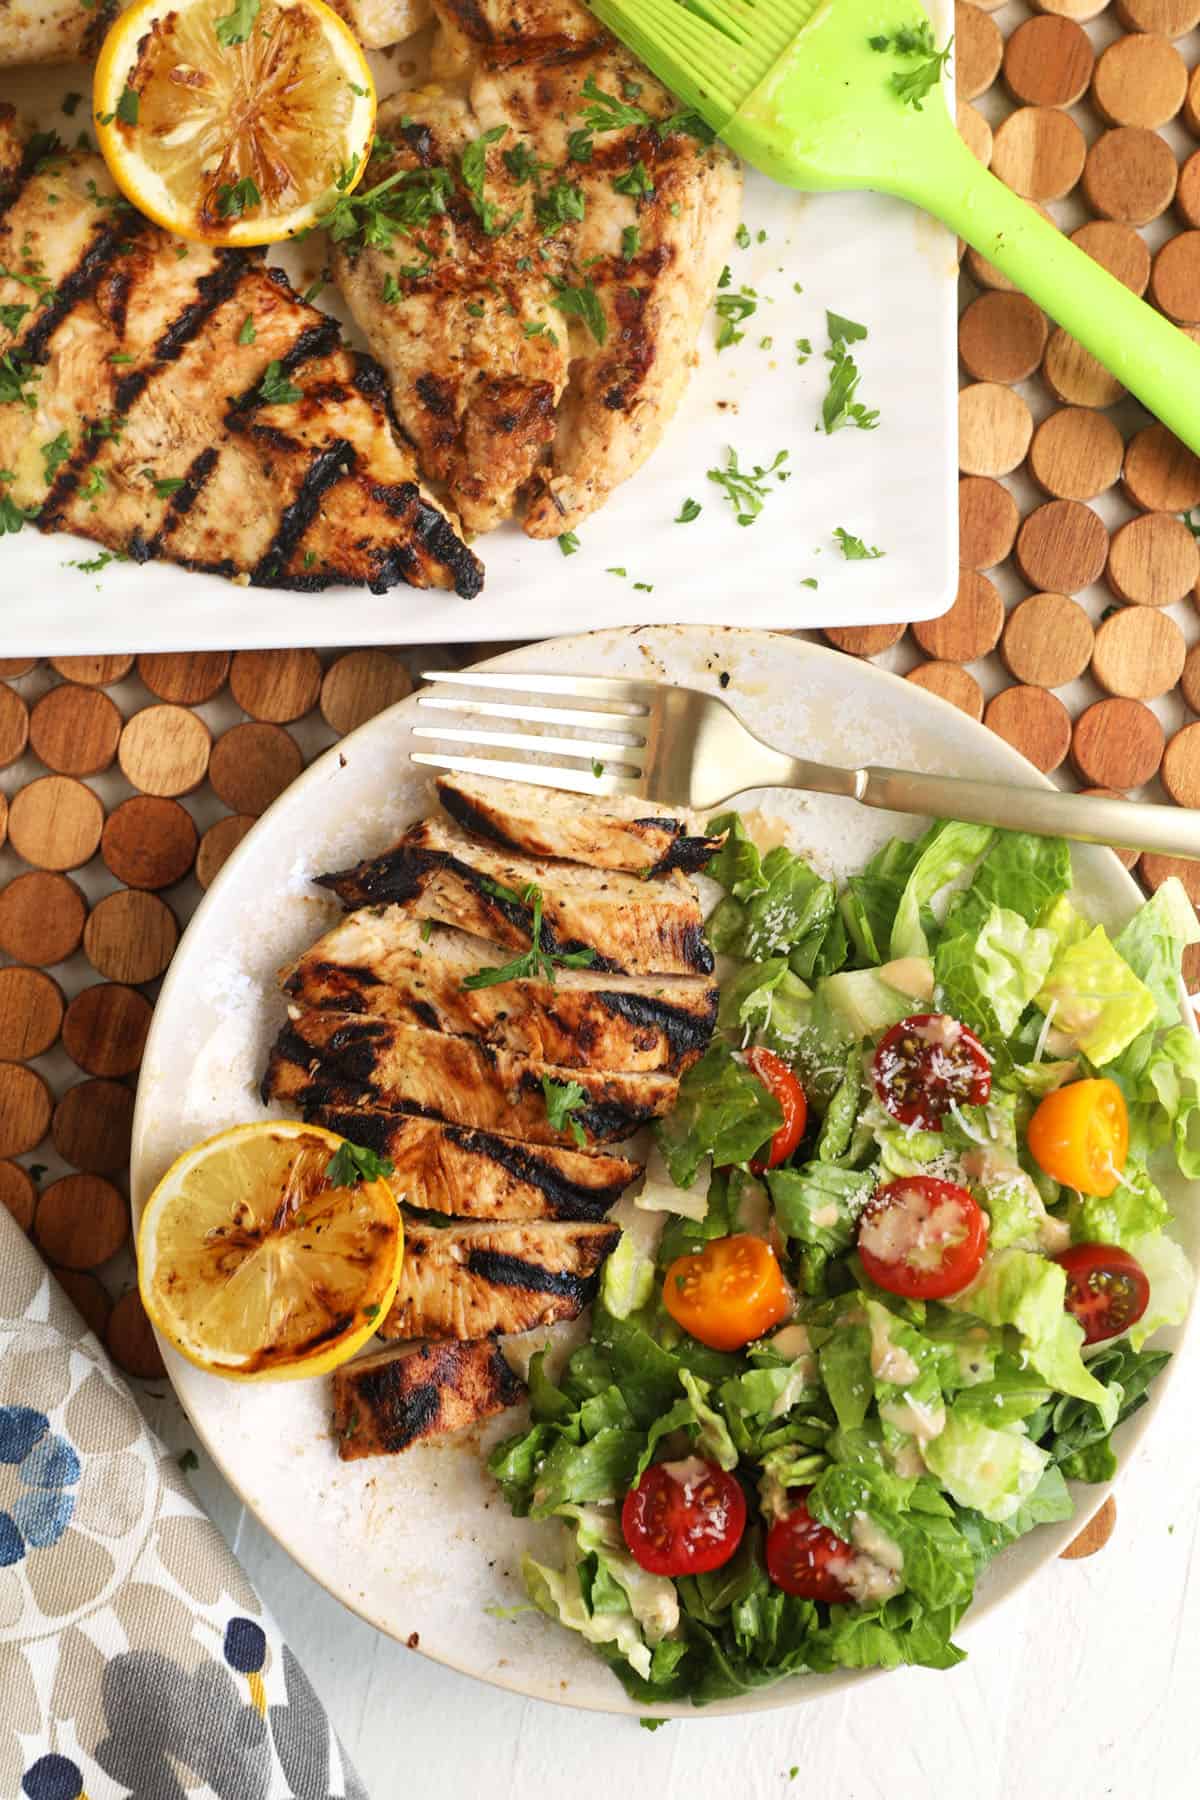 A plate of salad and grilled chicken is presented next to a full platter. 